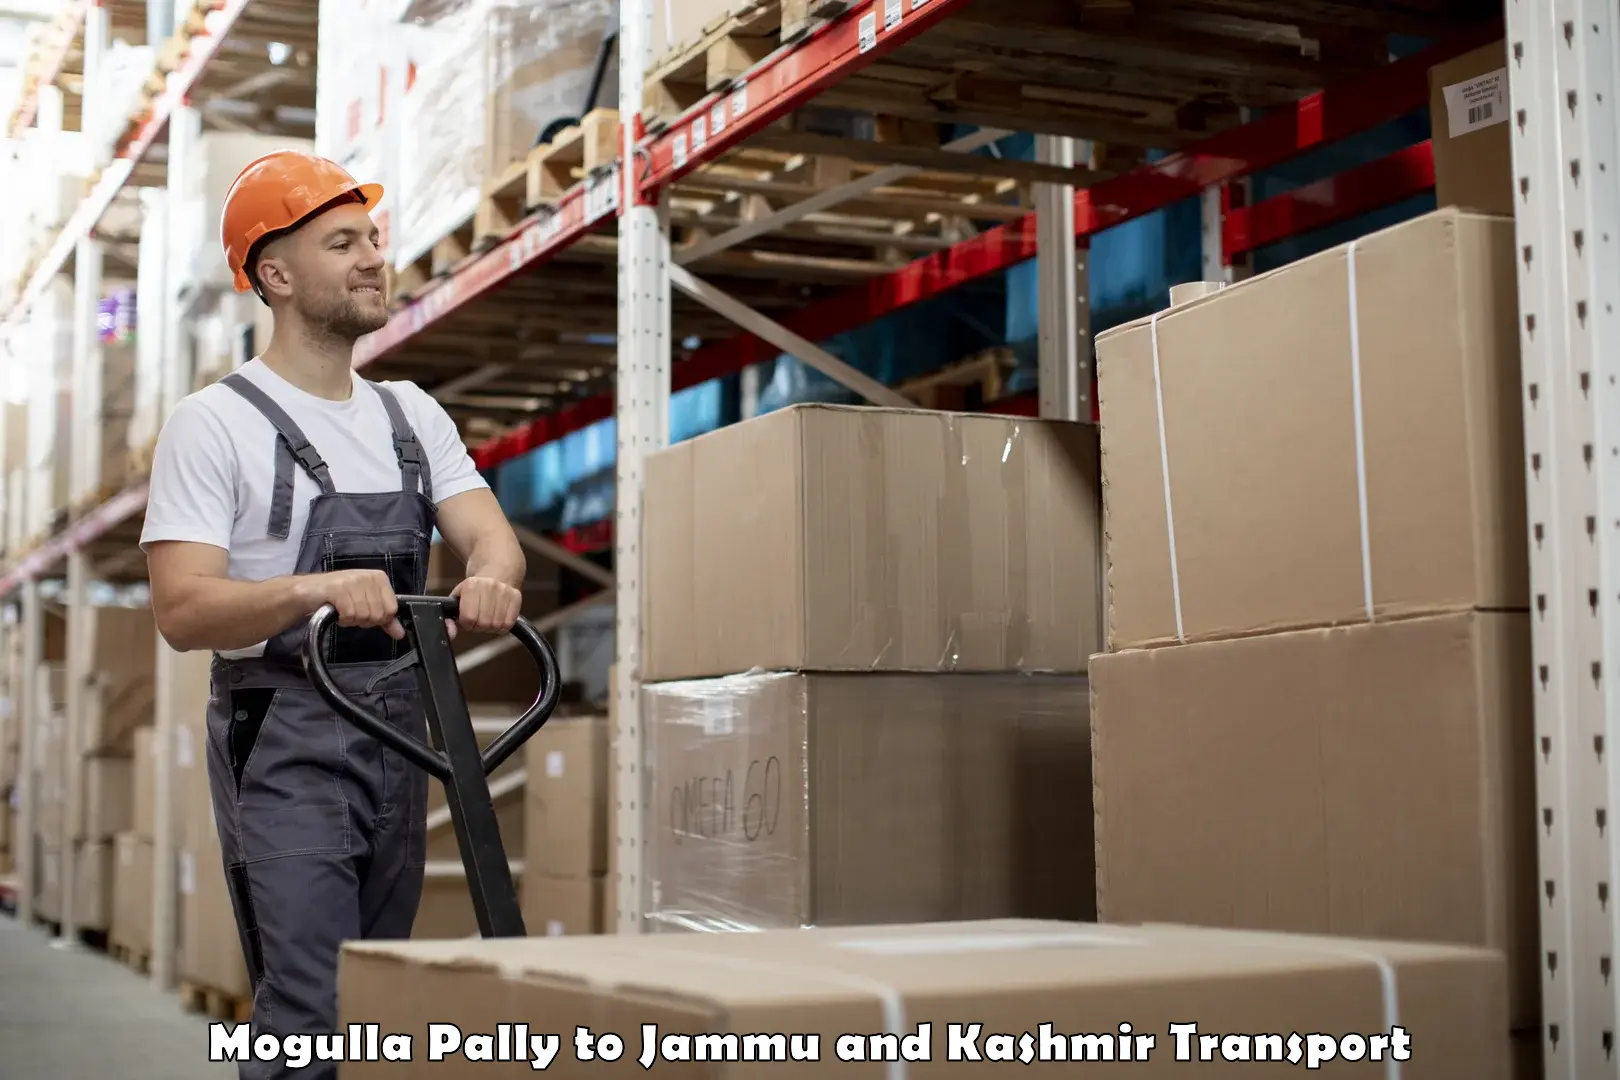 Air freight transport services in Mogulla Pally to IIT Jammu